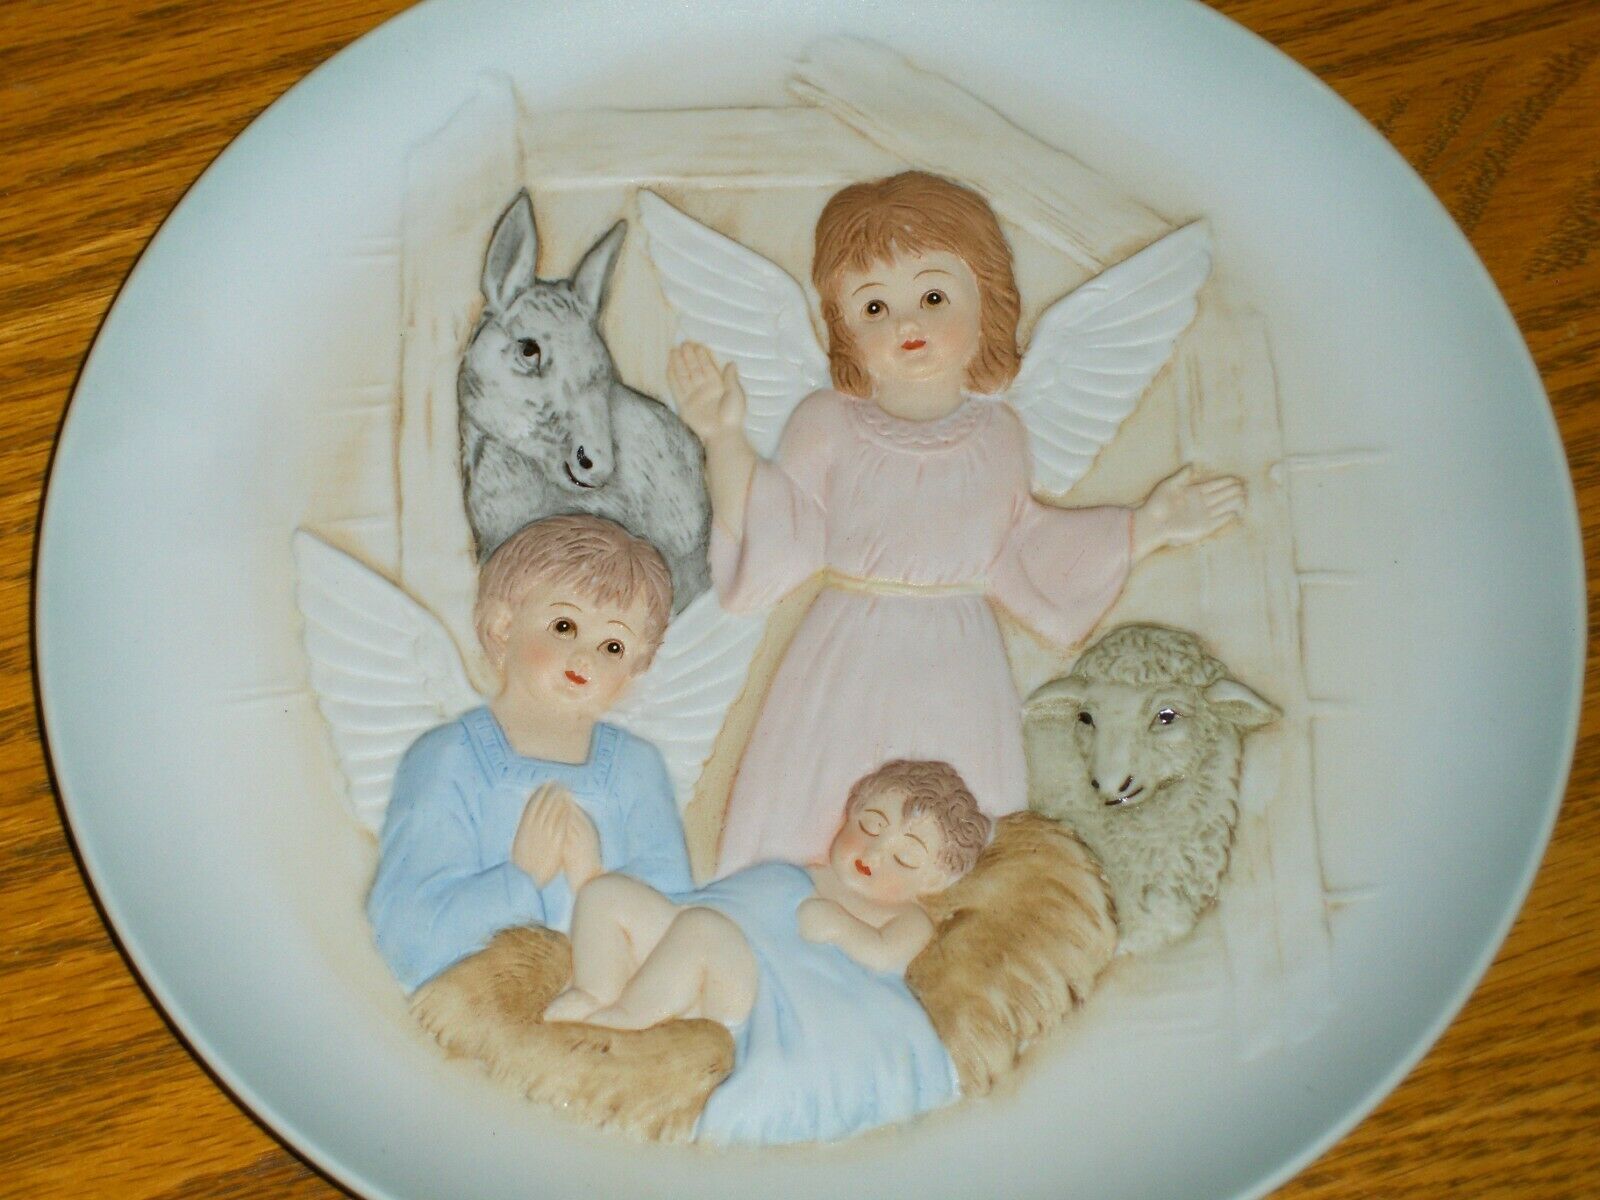 Lefton The Christopher Collection Plate Nativity Scene 1983 KW-03666 Christmas - $14.99